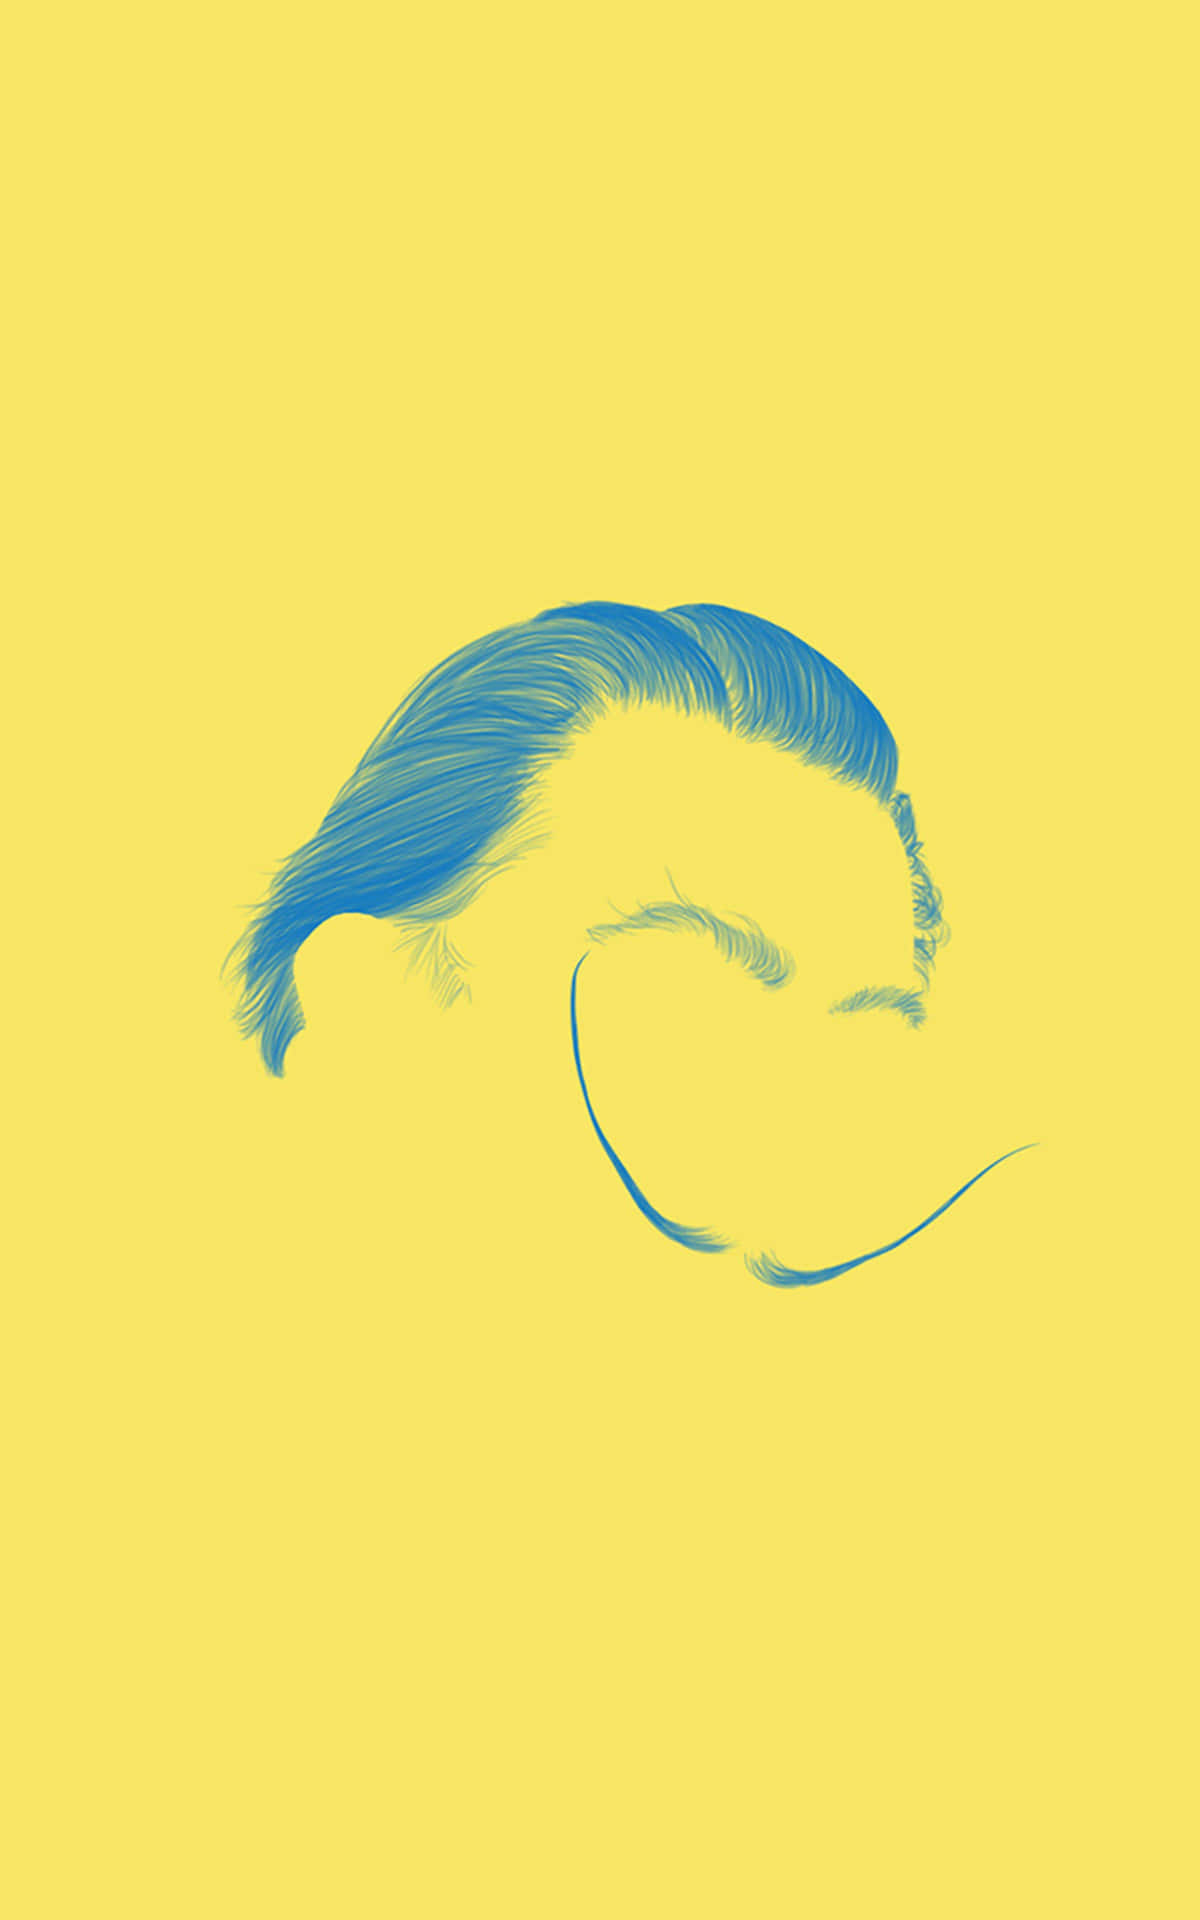 A Man's Face With Blue Hair On A Yellow Background Wallpaper